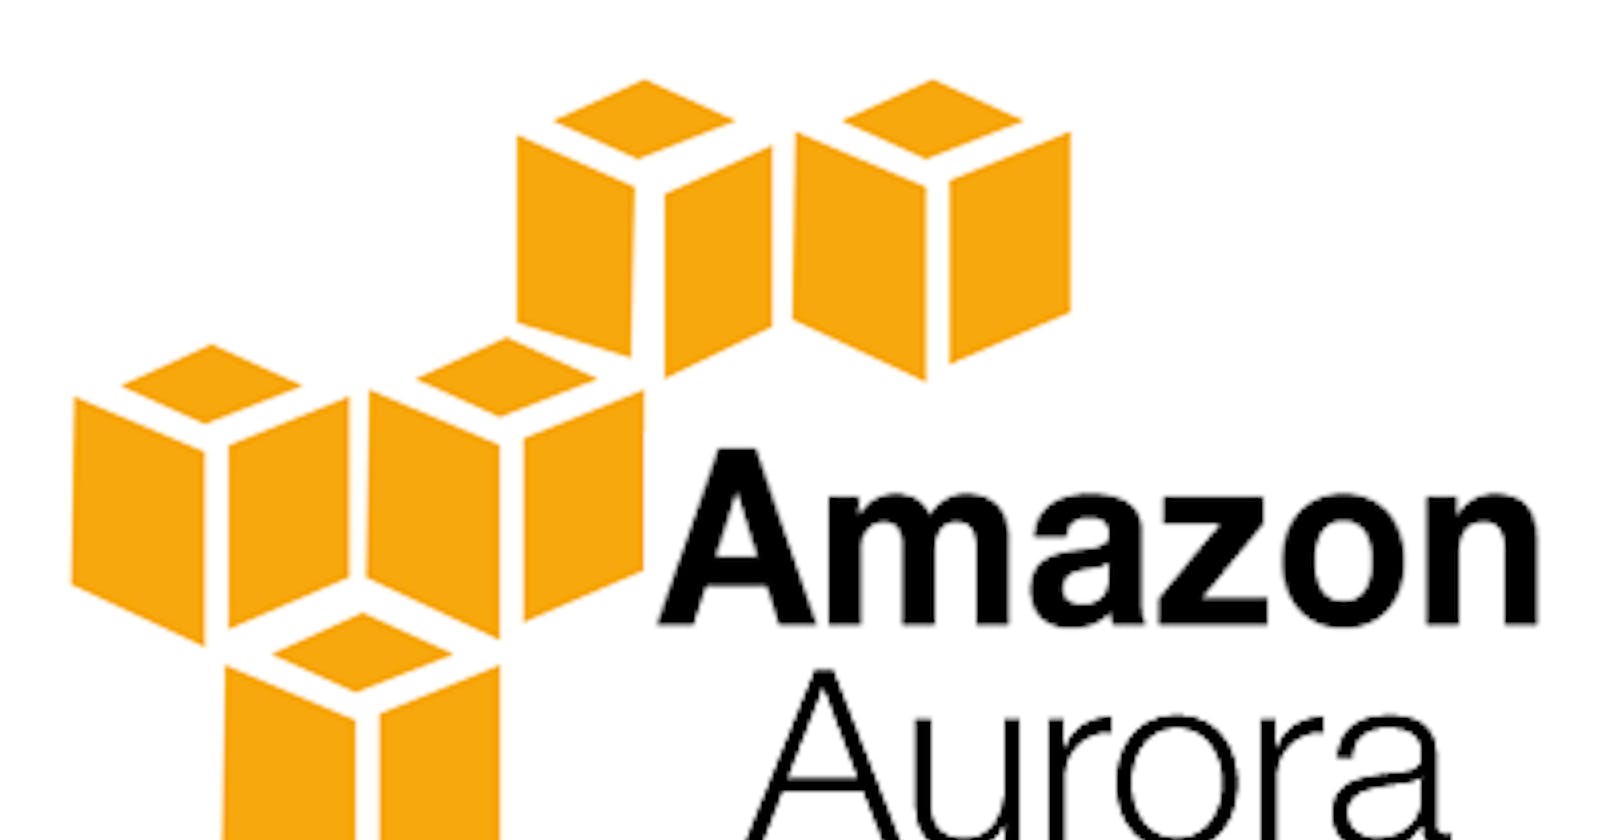 Amazon Aurora: Design Considerations for High Throughput Cloud-Native Relational Databases (Part 2)